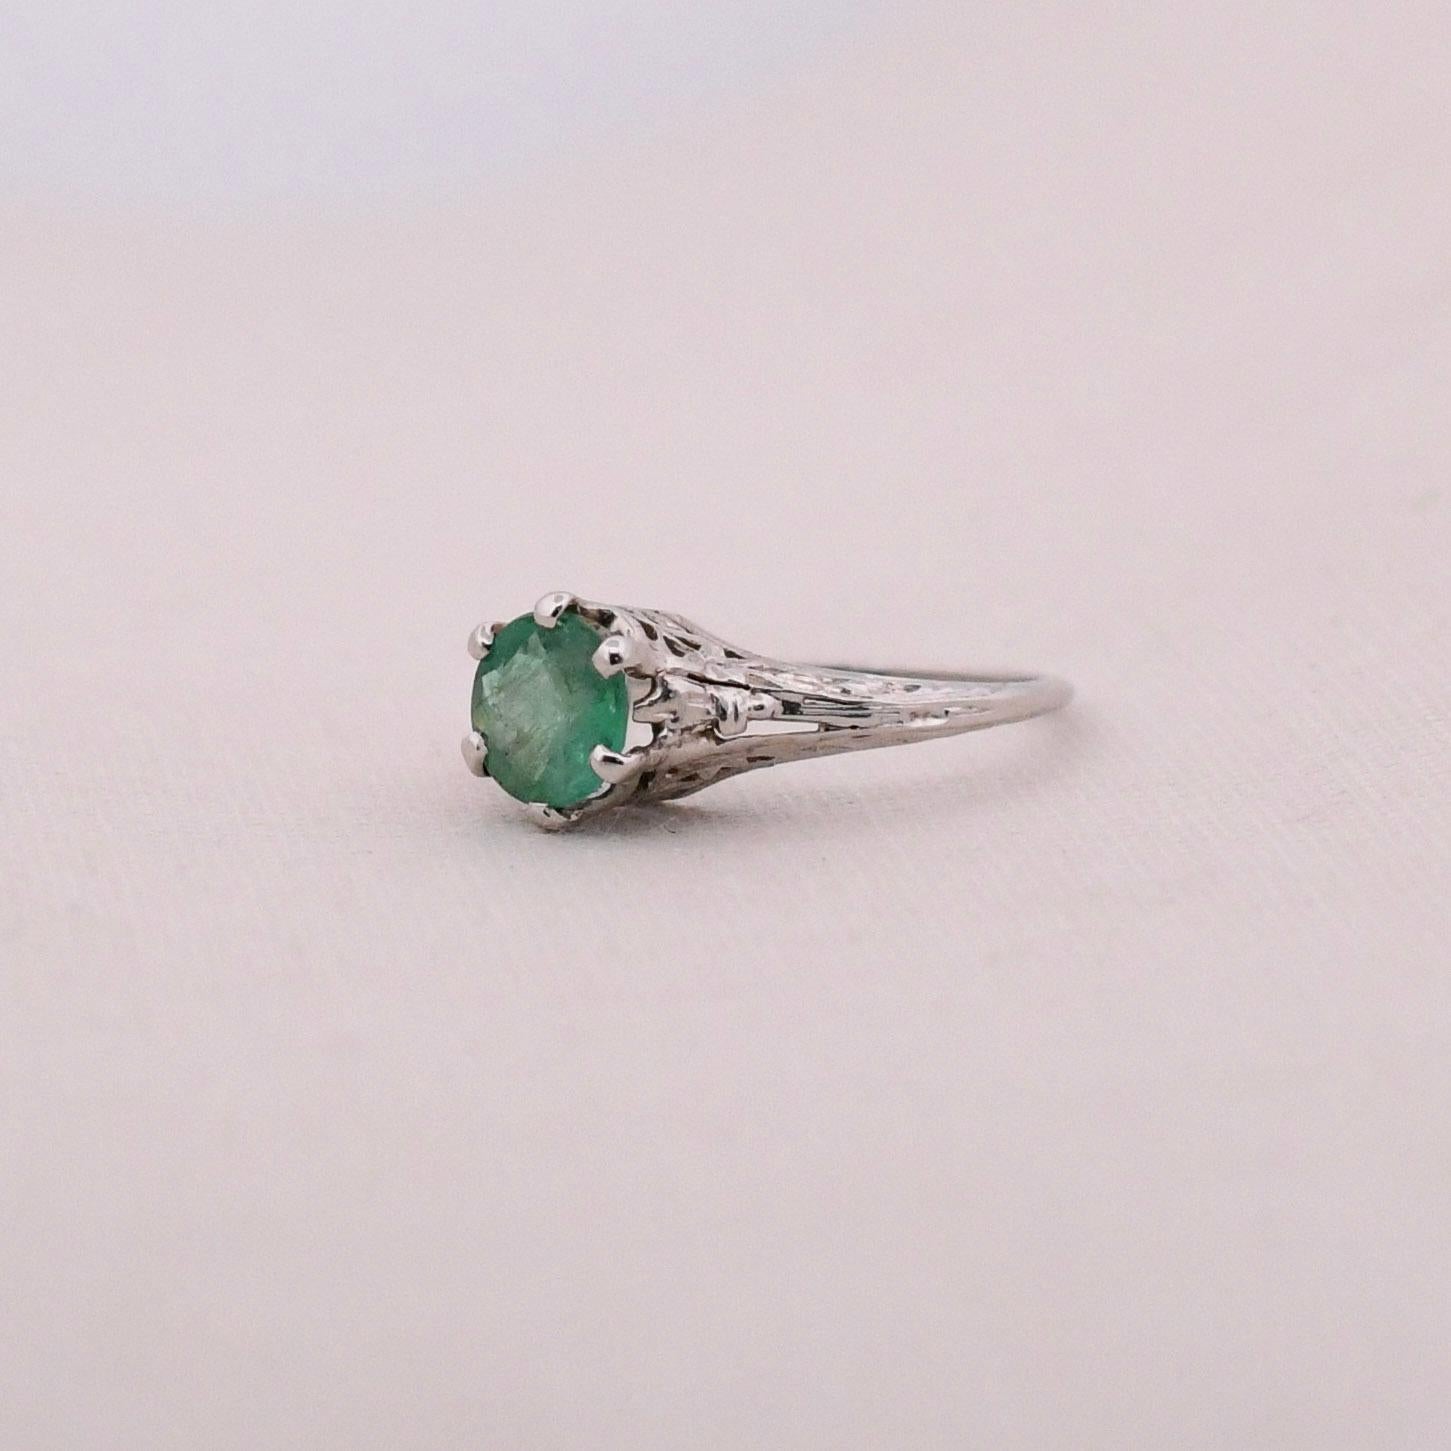 This unique gem is a stunning hue of green. Crafted in platinum this floral designed filigree ring has beautiful open work giving the overall piece a weightless feel. In the center of the six prong setting is perfectly paired with a round cut